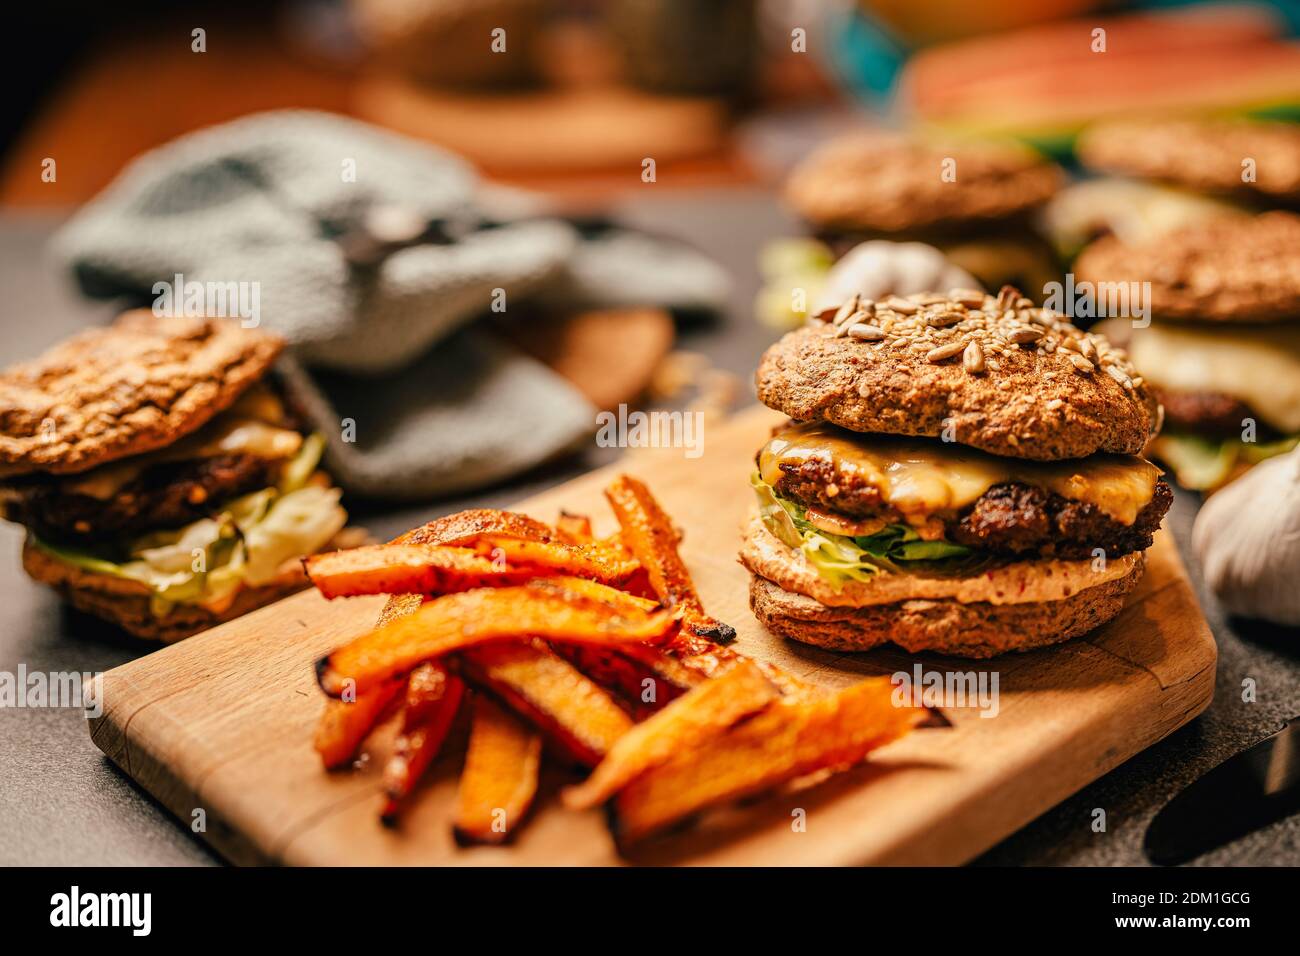 Homemade low carb diet hamburger with seed flour buns and pumpkin fries.Diet burgers with sugar-free sauce, mayonnaise, lettuce, and melted cheese.Bee Stock Photo